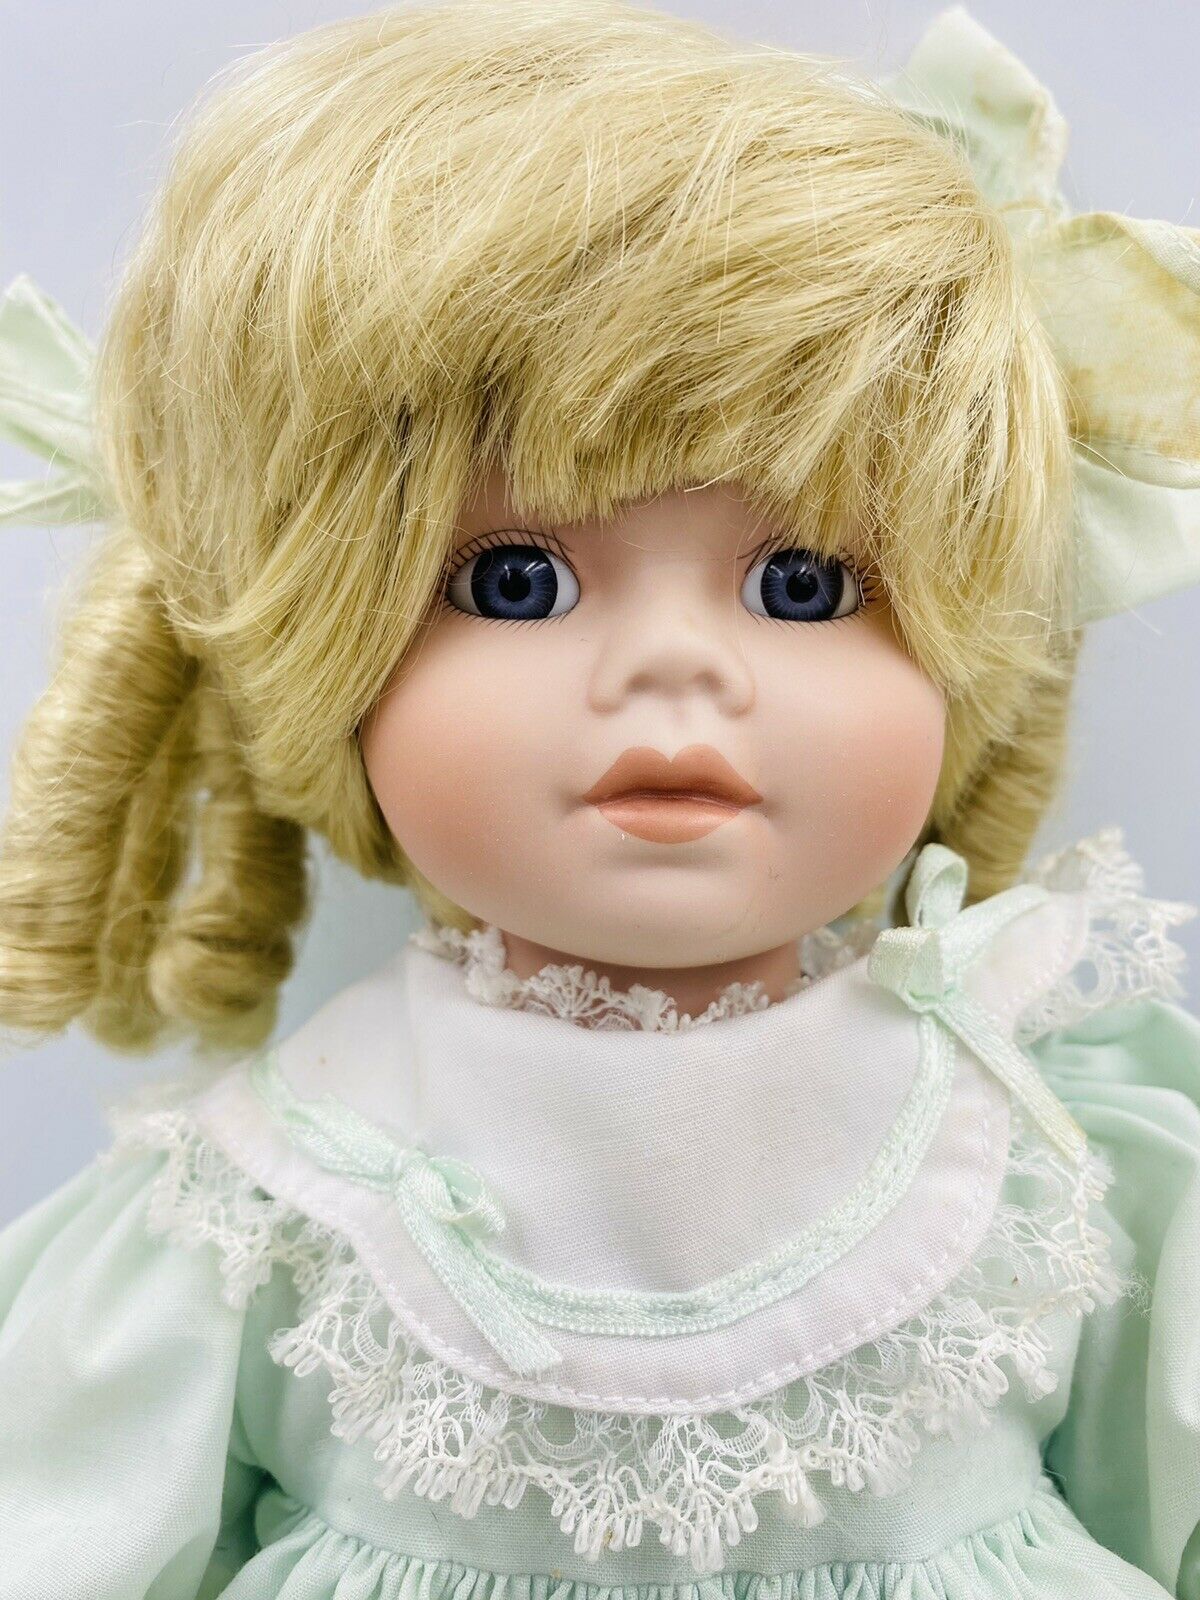 Haunted Baby Doll Karen! … She Wants A  Mommy or Daddy!  See Video!